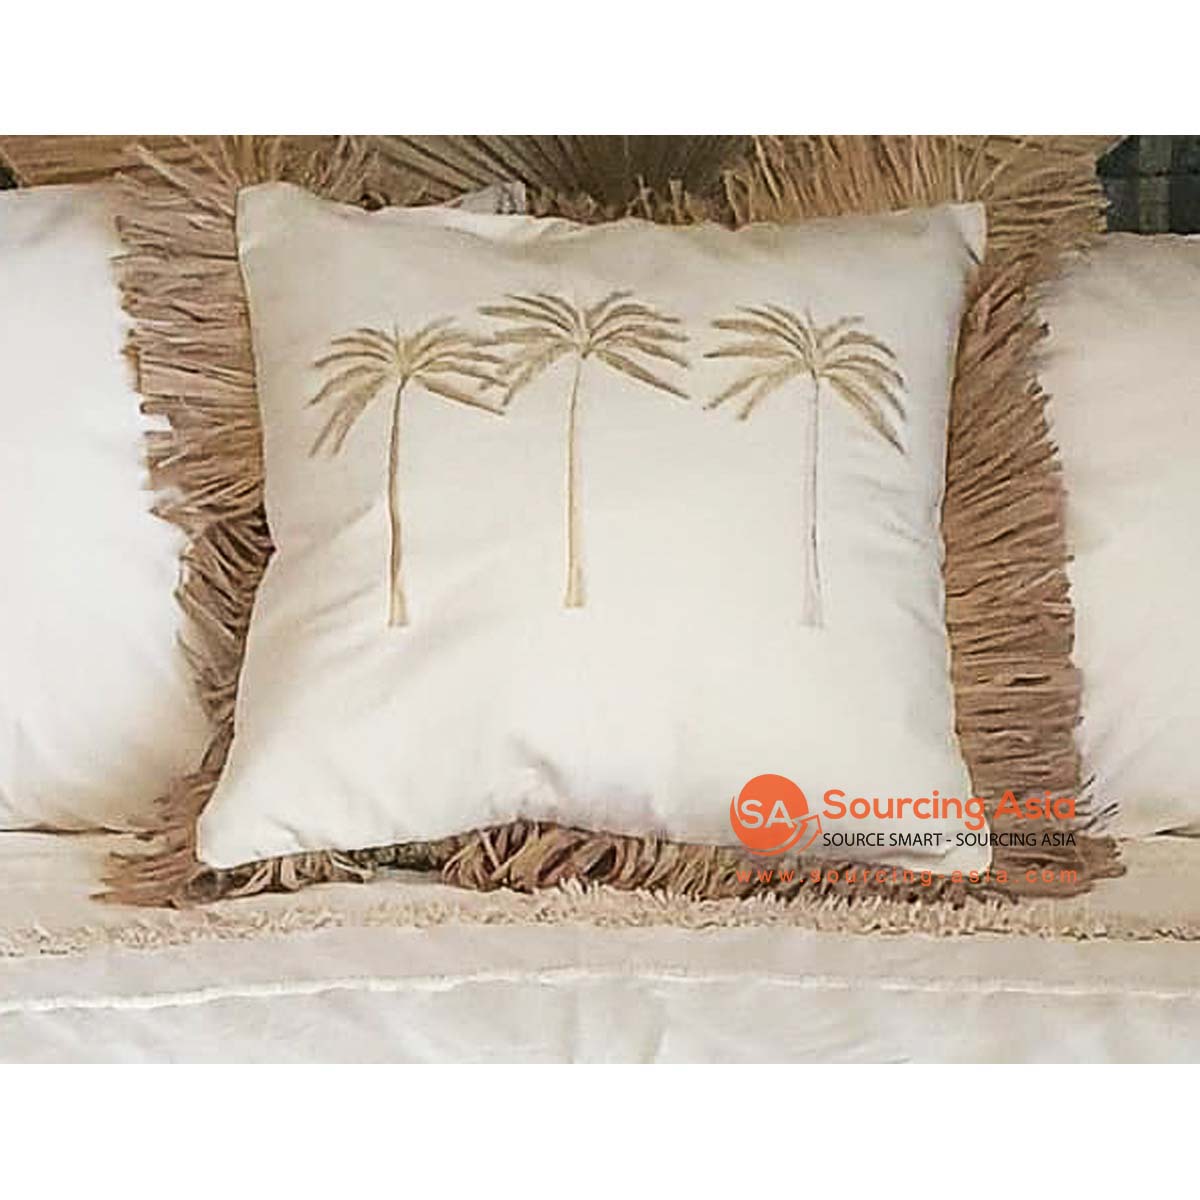 MAC276 OFF WHITE COTTON CUSHION COVER WITH PALM TREES EMBROIDERY AND STRAW FRINGE (PRICE WITHOUT INNER)